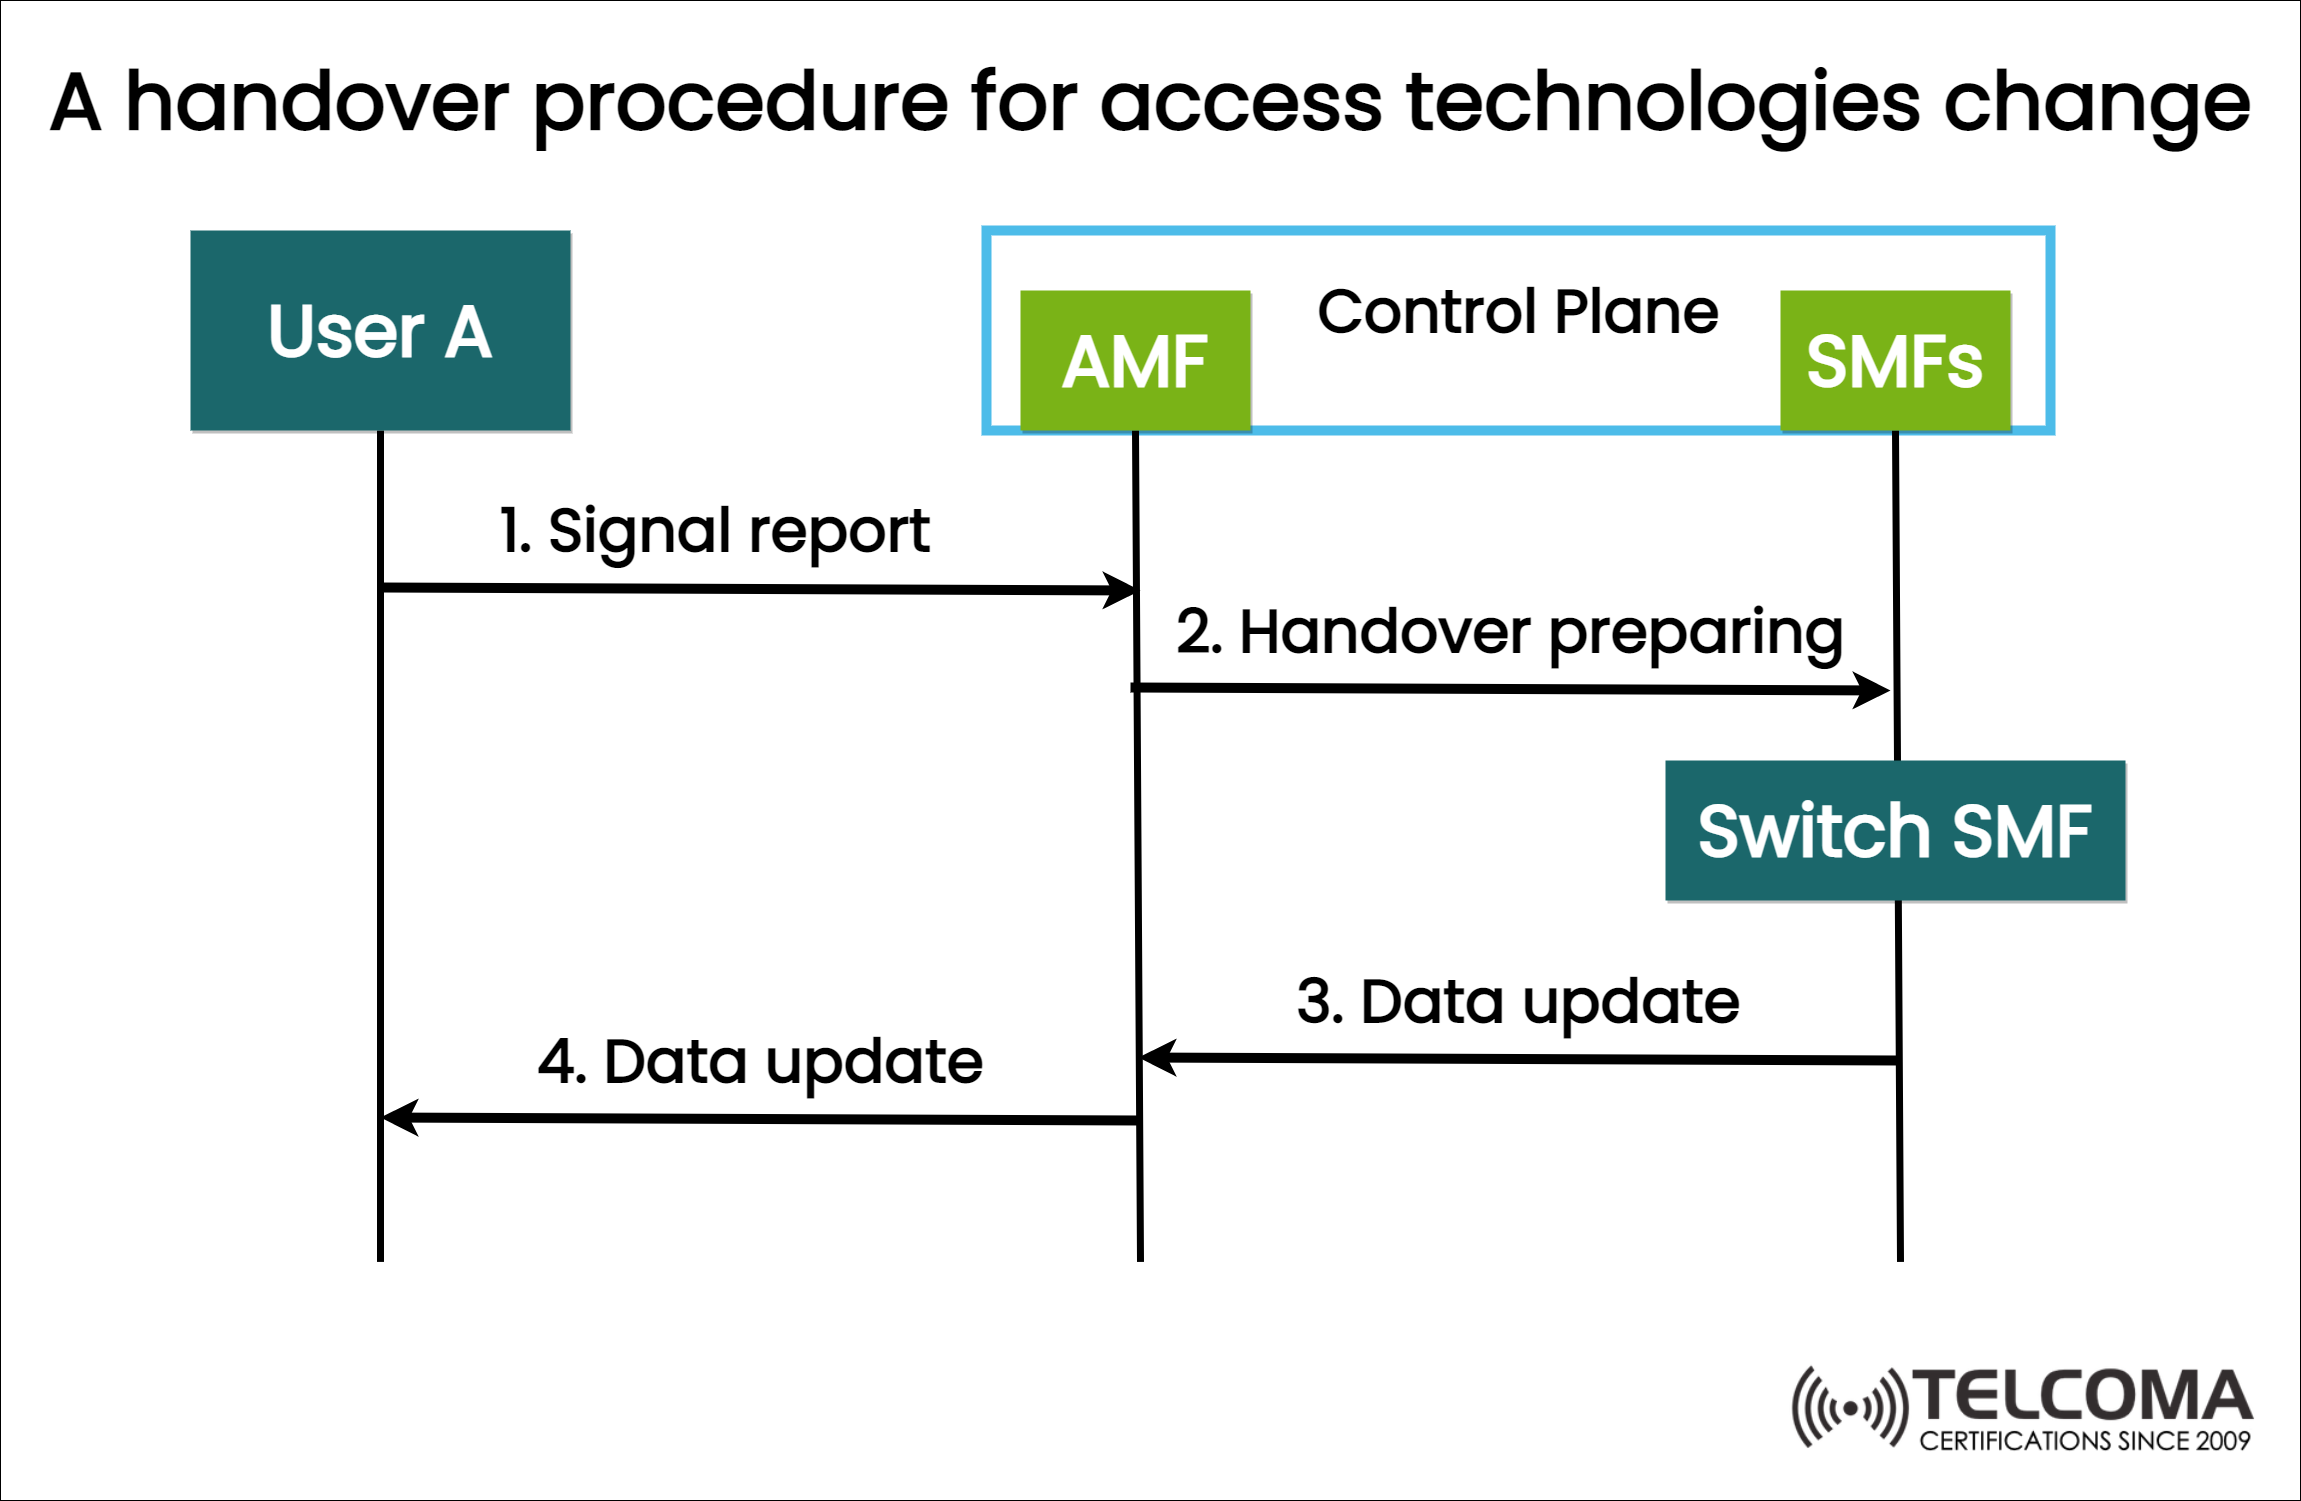 hanover procedure for access technology change